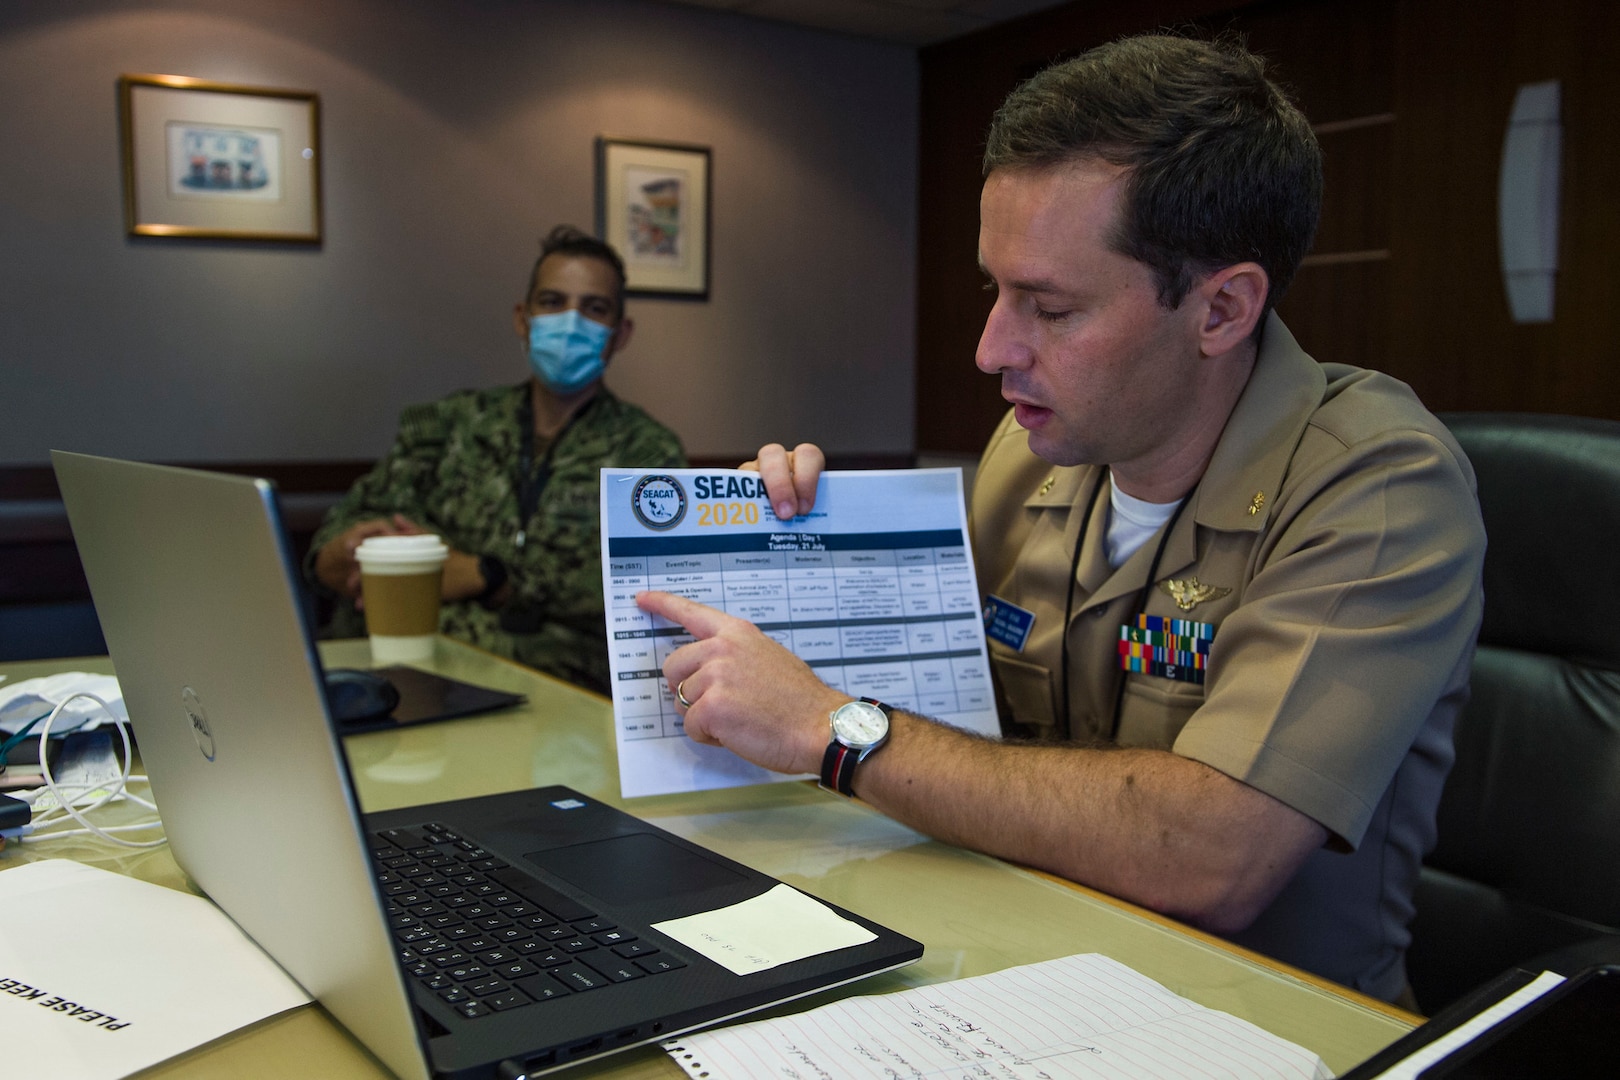 22 nations participate virtually in 19th SEACAT